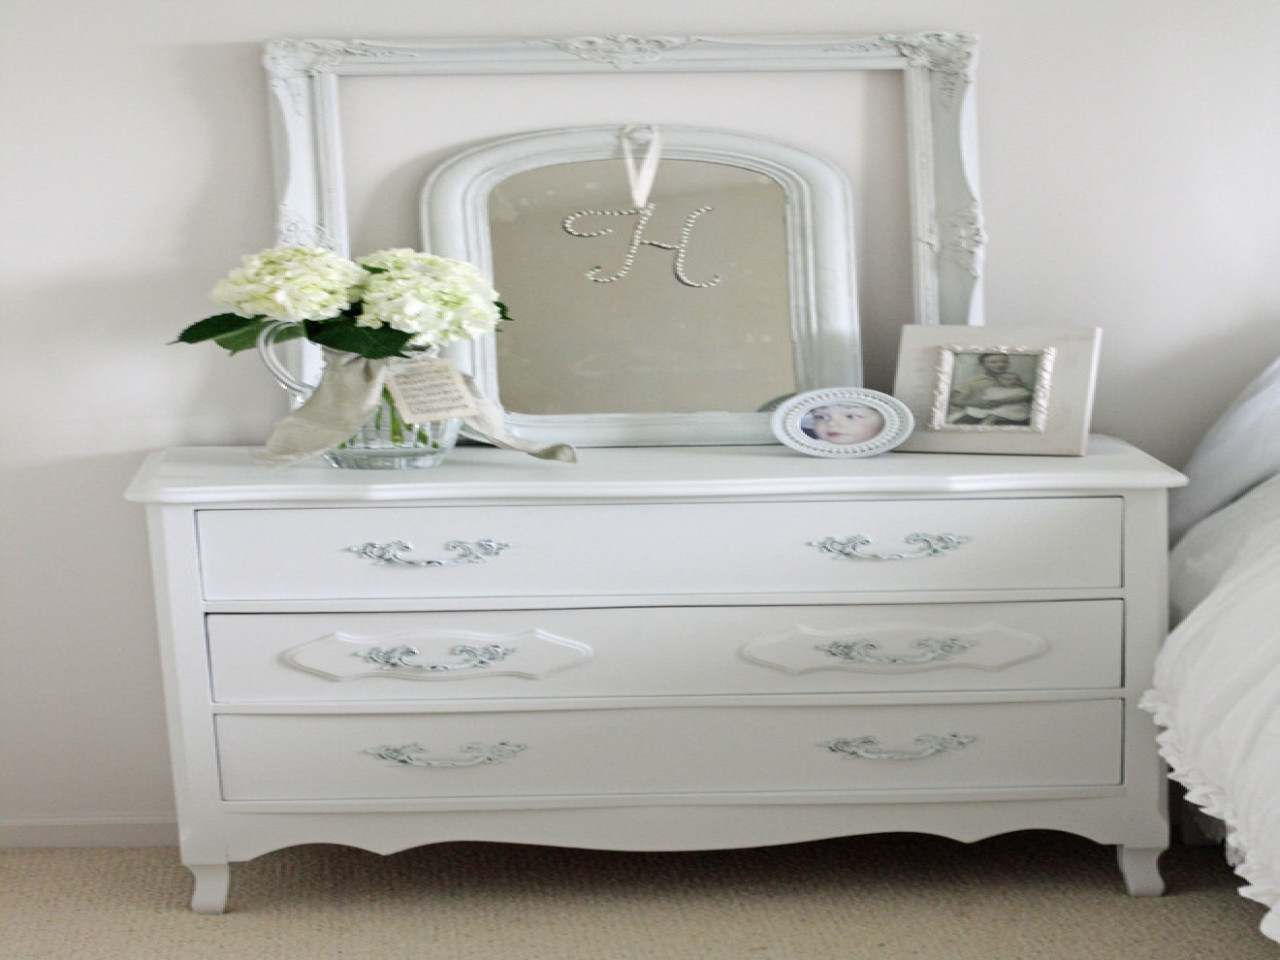 Cheap Shabby Chic Bedroom Furniture
 Bedside tables and dressers cheap dressers for sale